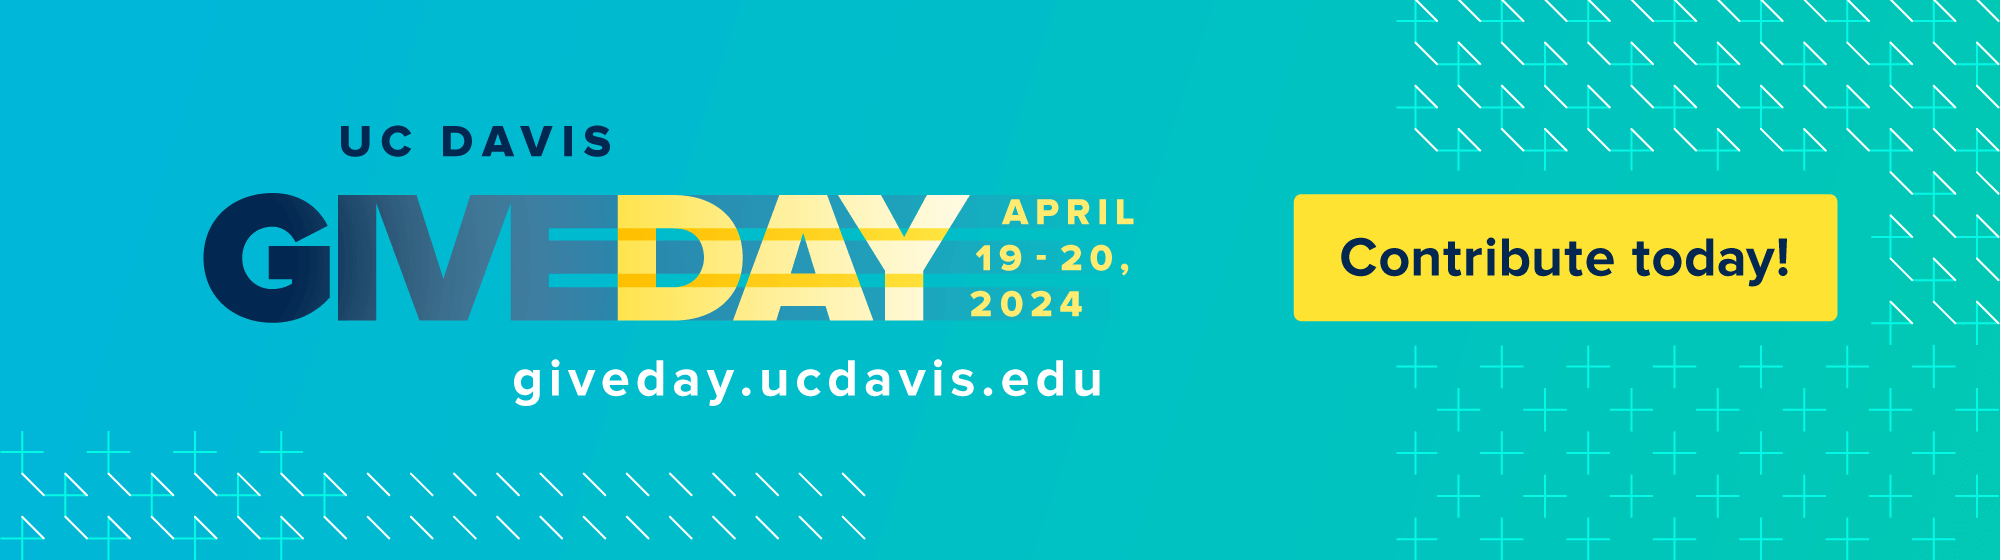 A banner encouraging users to participate in UC Davis Give Day which begins at 9am on 4/19/2024